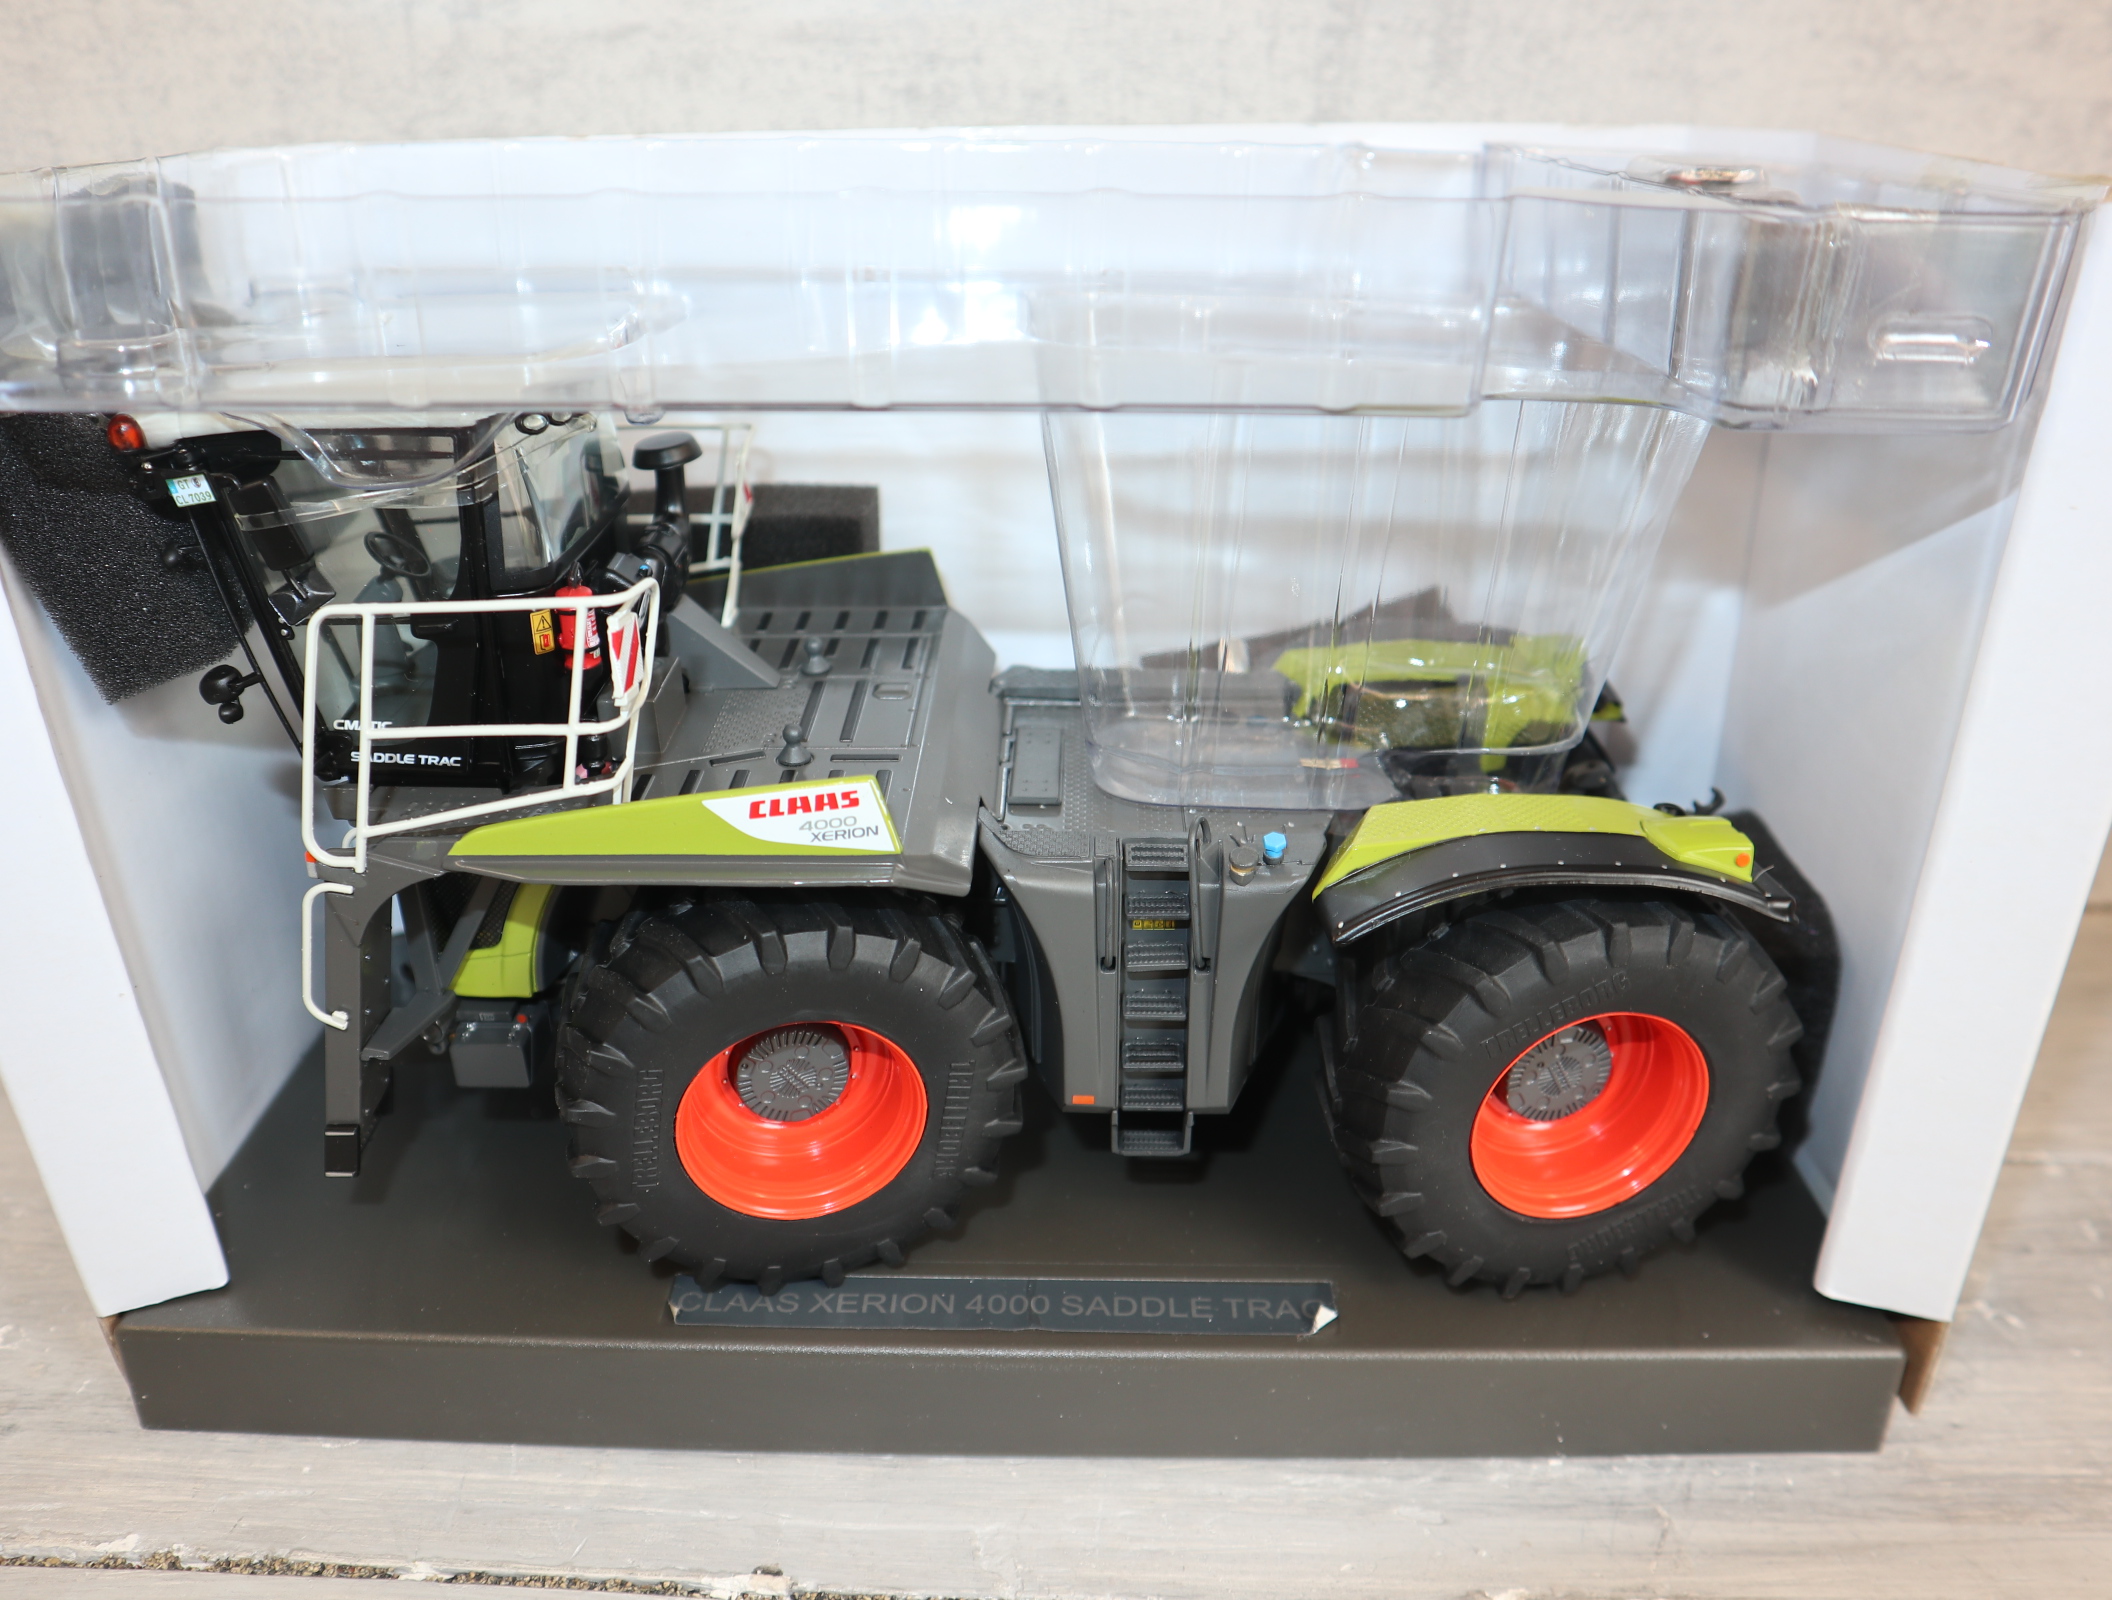 Weise Toys 1030 in 1:32  Claas Xerion 4000 Saddle Trac in OVP